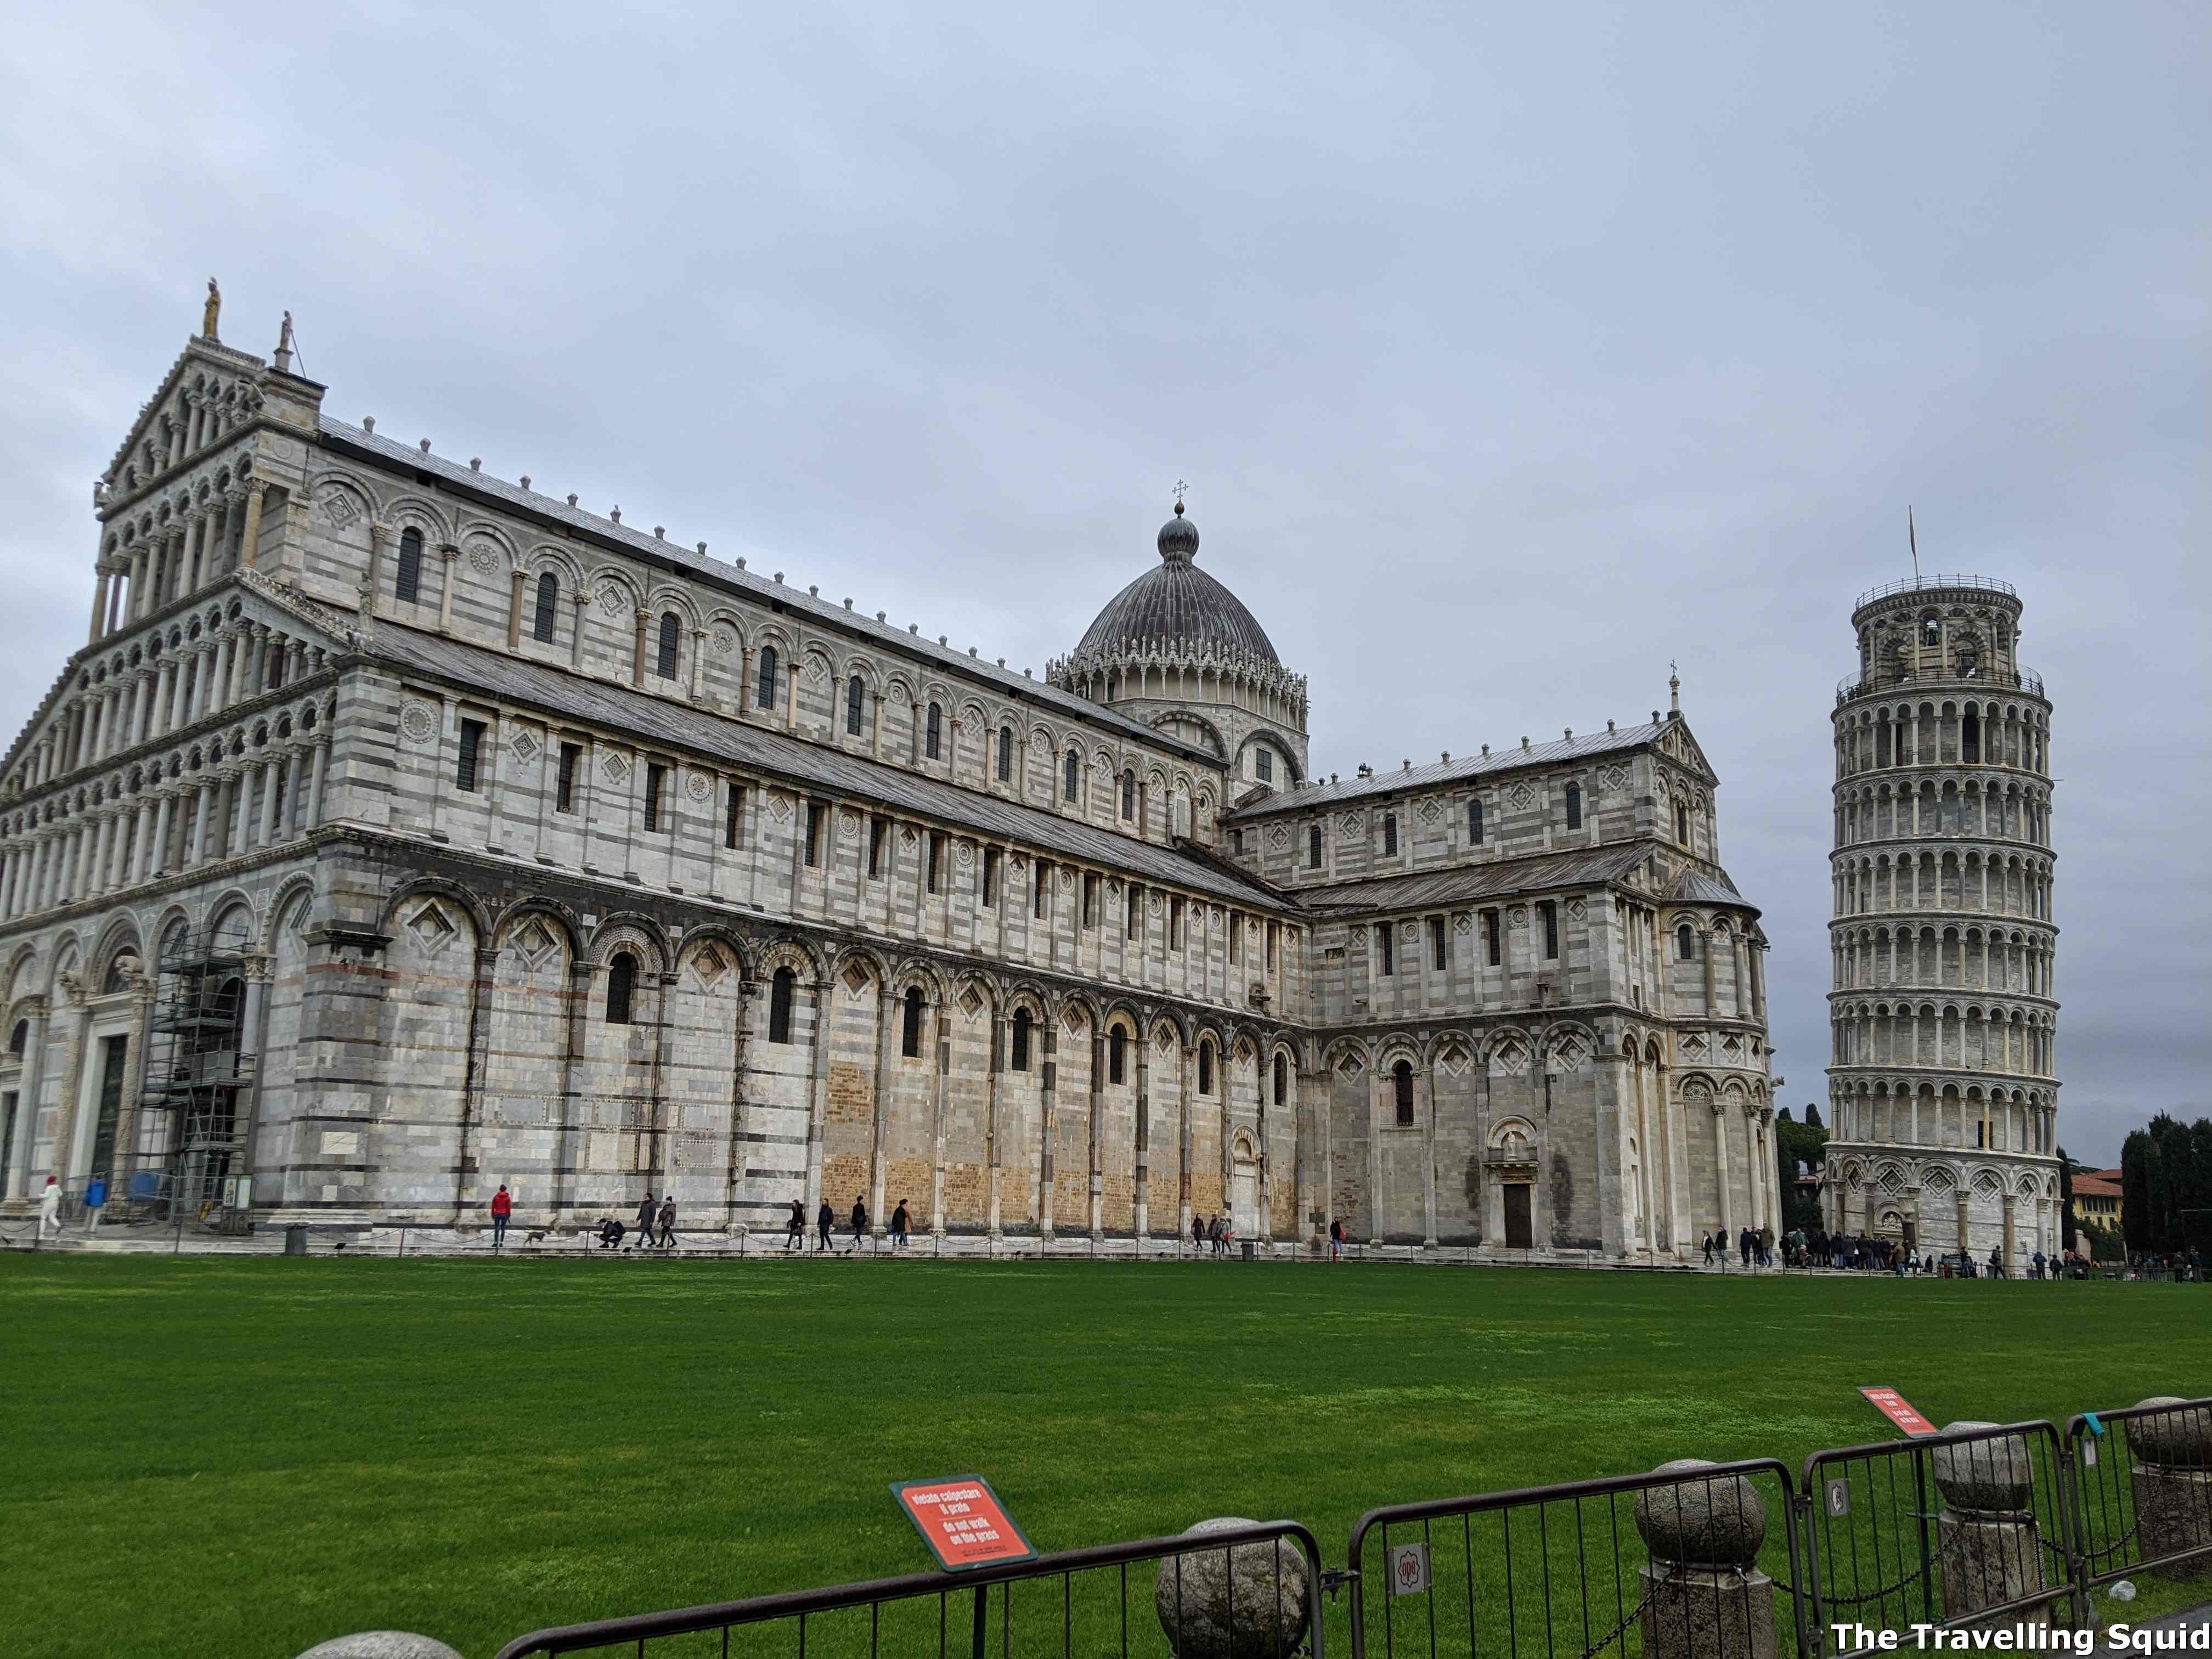 paying to climb up the Leaning Tower of Pisa